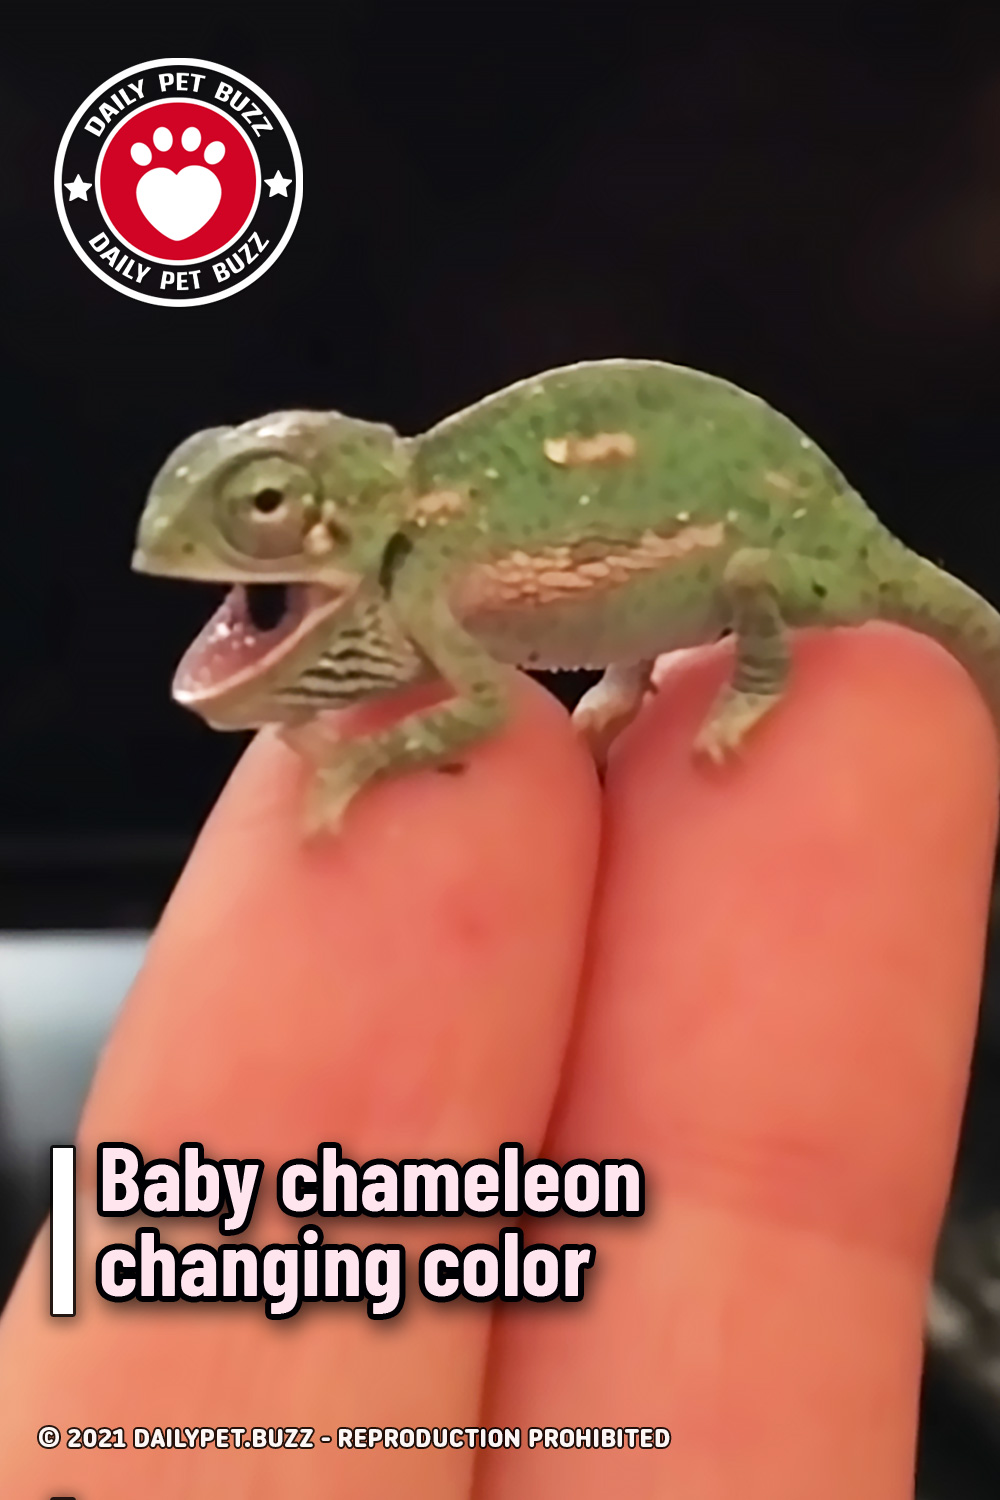 Baby chameleon changing color